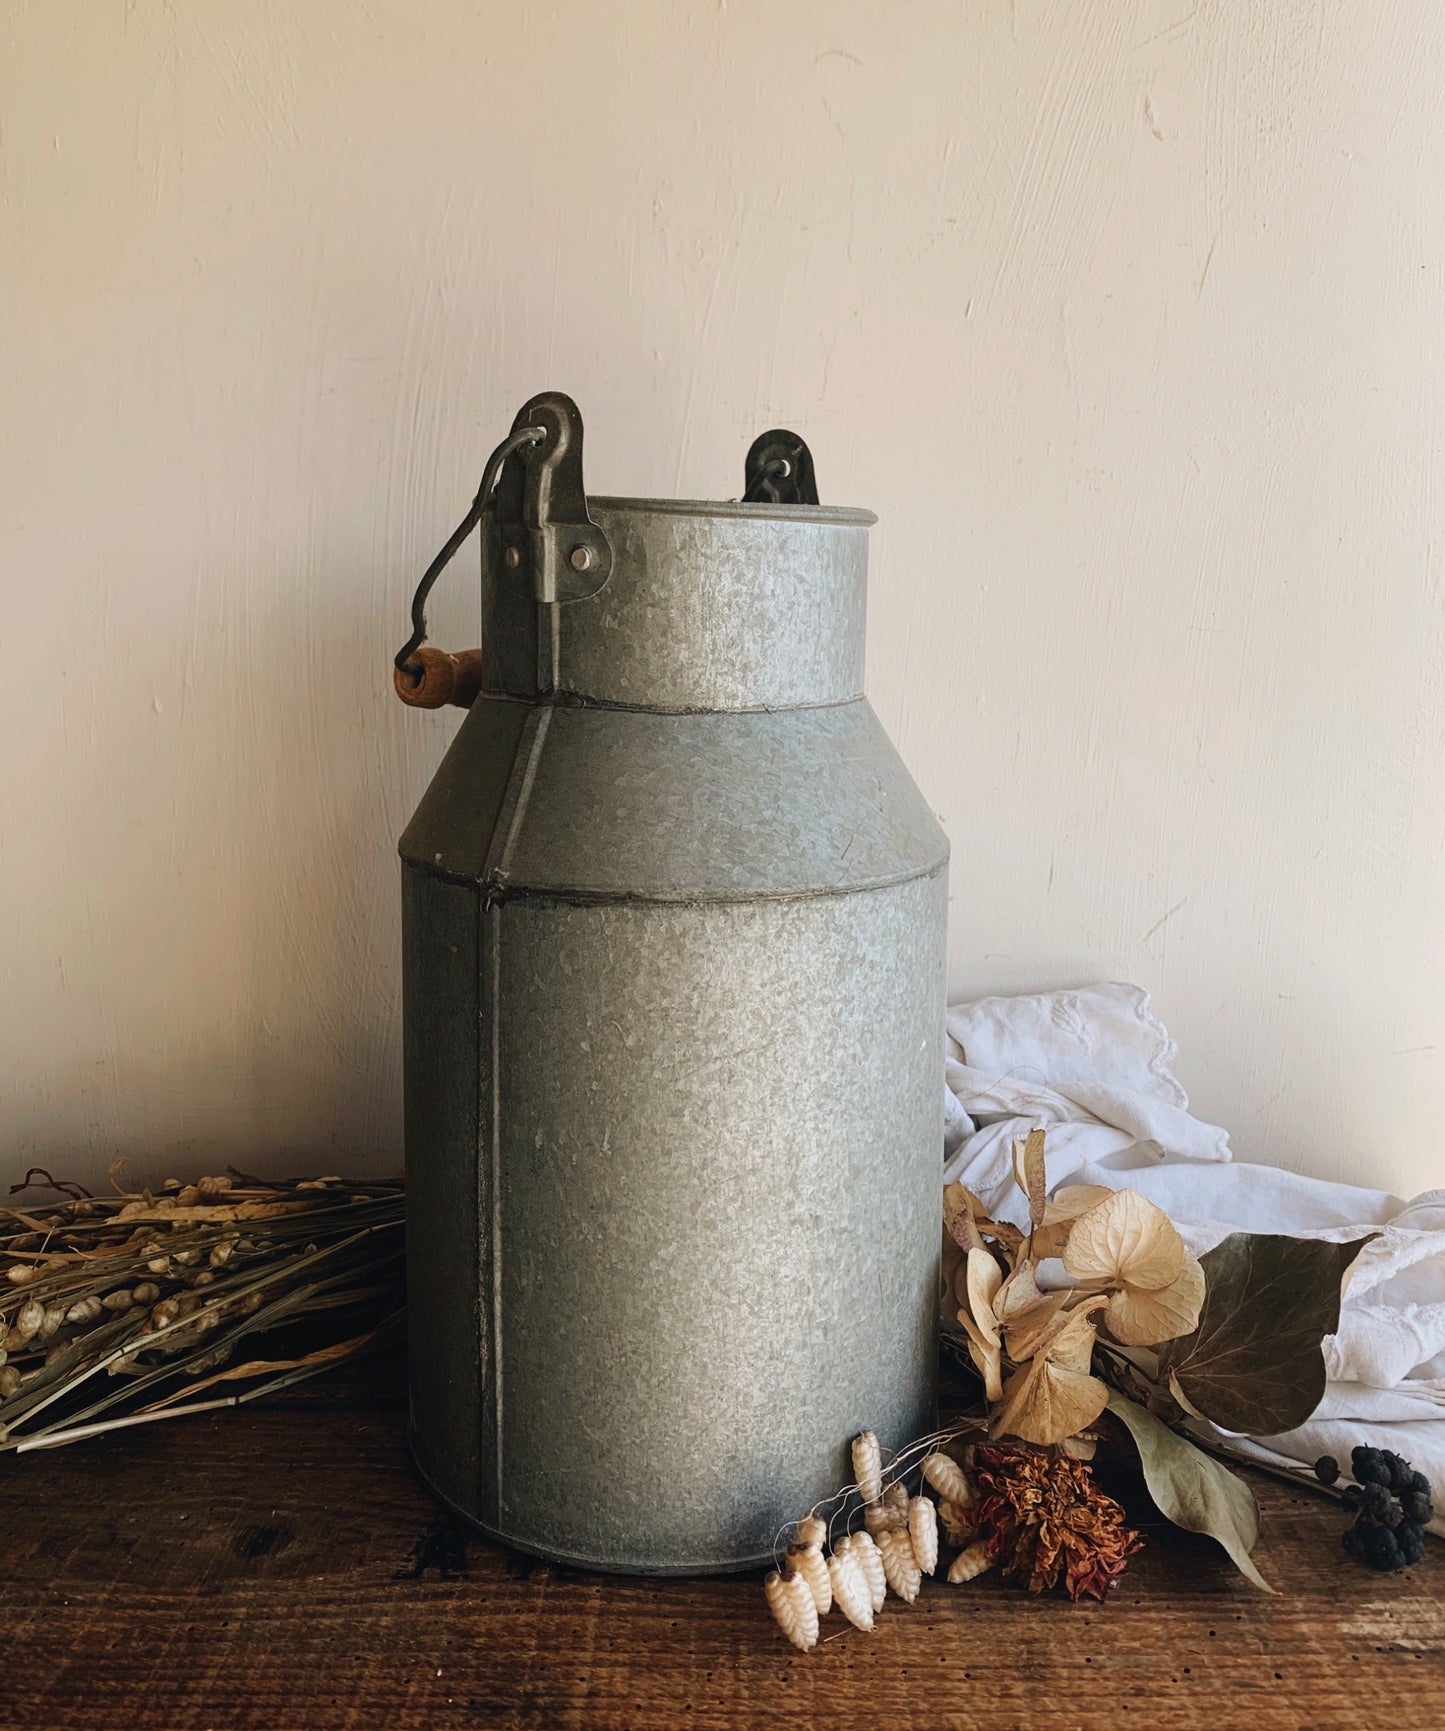 Vintage Rustic Milk Churn with Wooden Handle